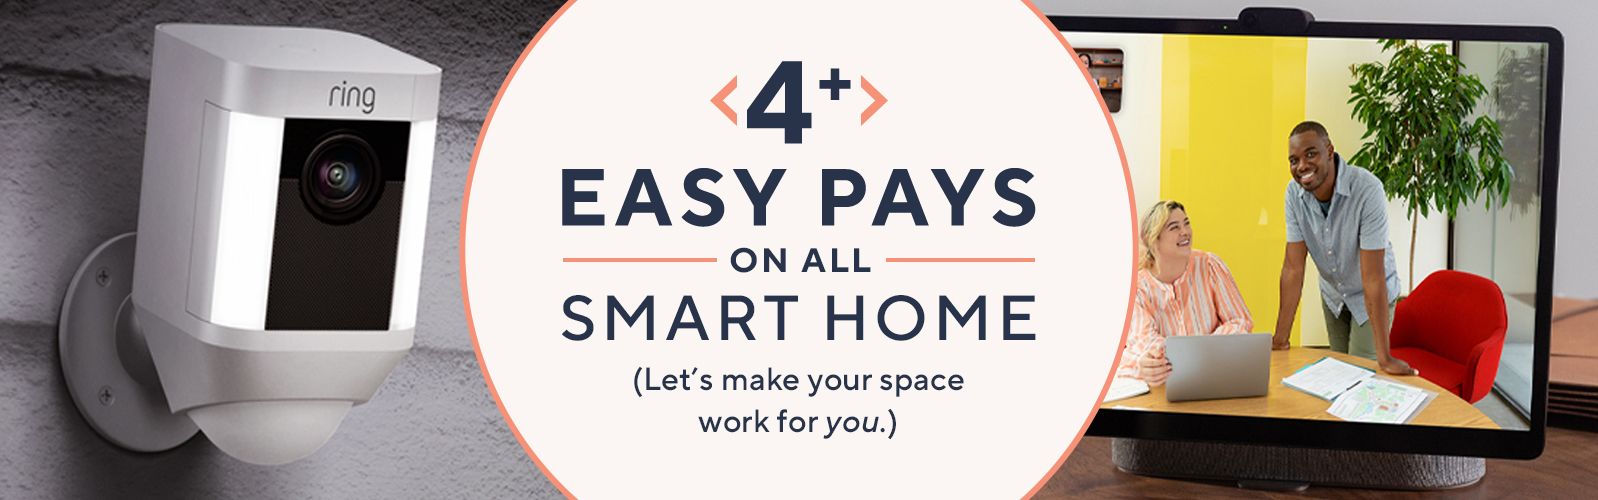 4 or more Easy Pays on All Smart Home (Let’s make your space work for you.)